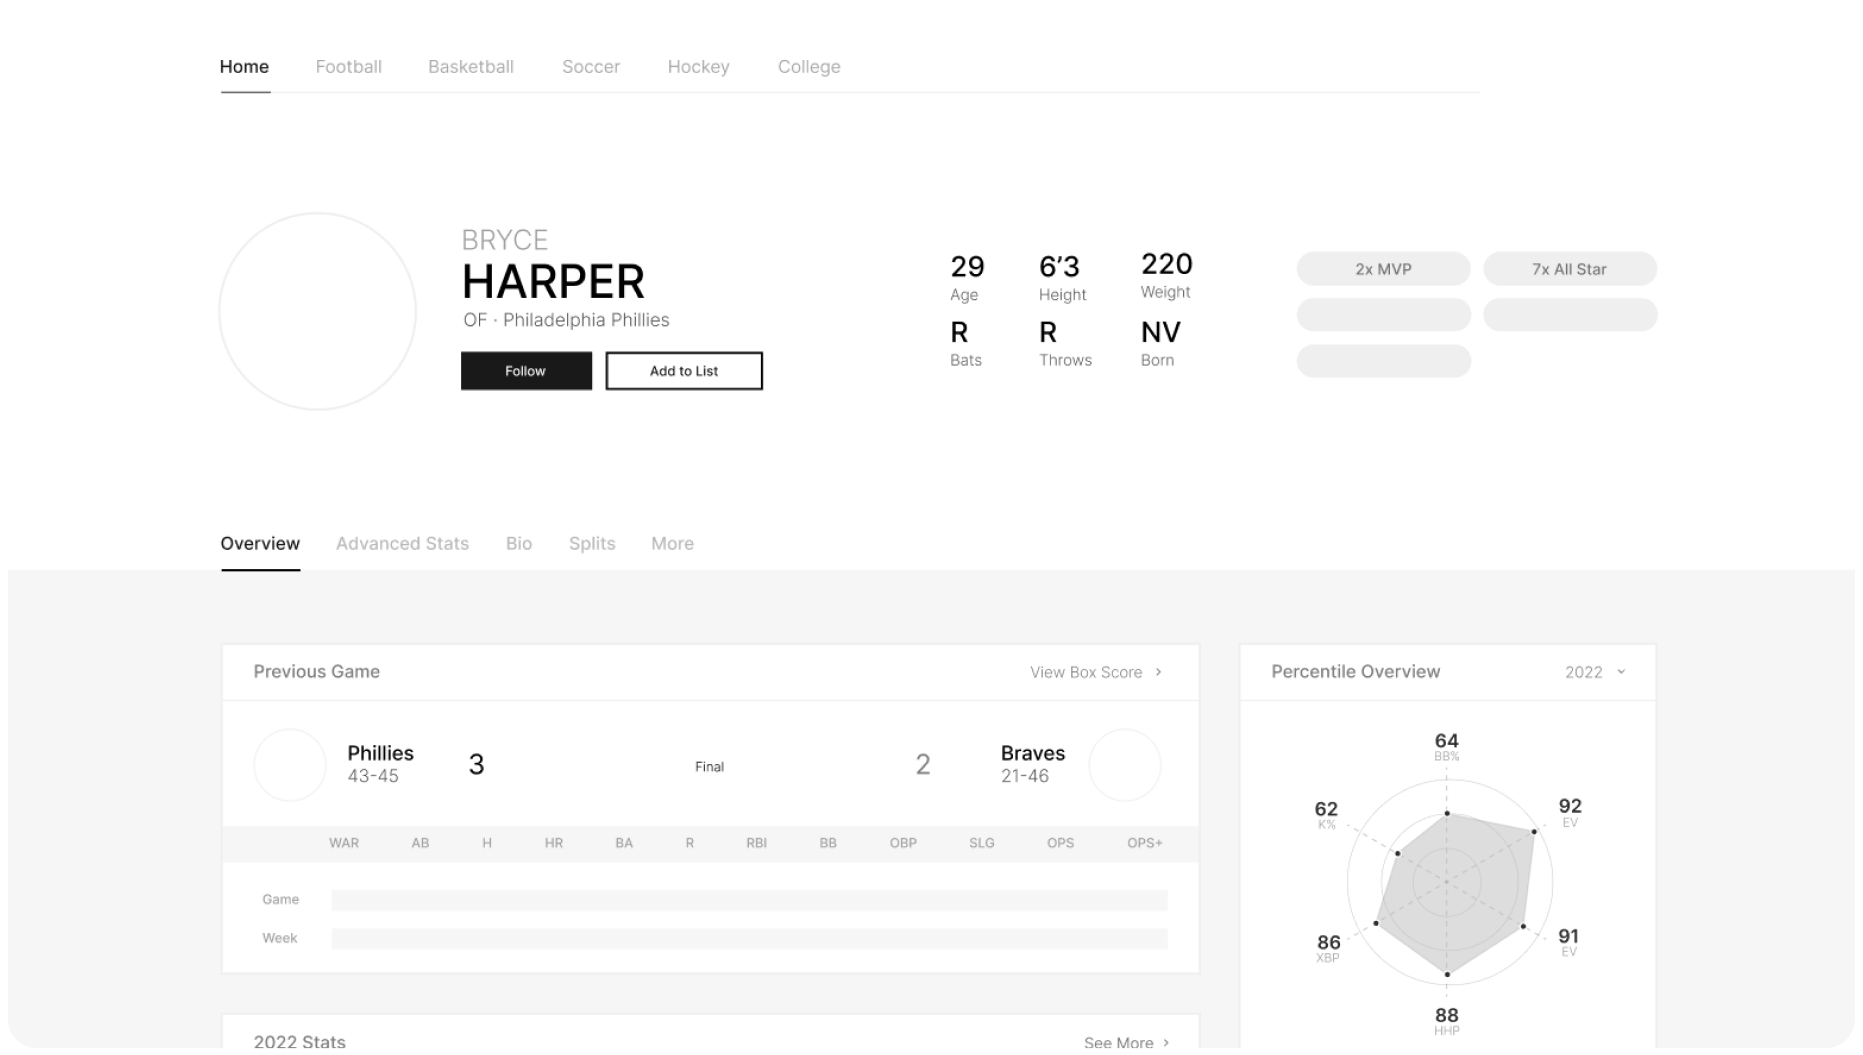 Low-fidelity player page concept with revamped information hierarchy and inclusion of data visualization and time-sensitive information.